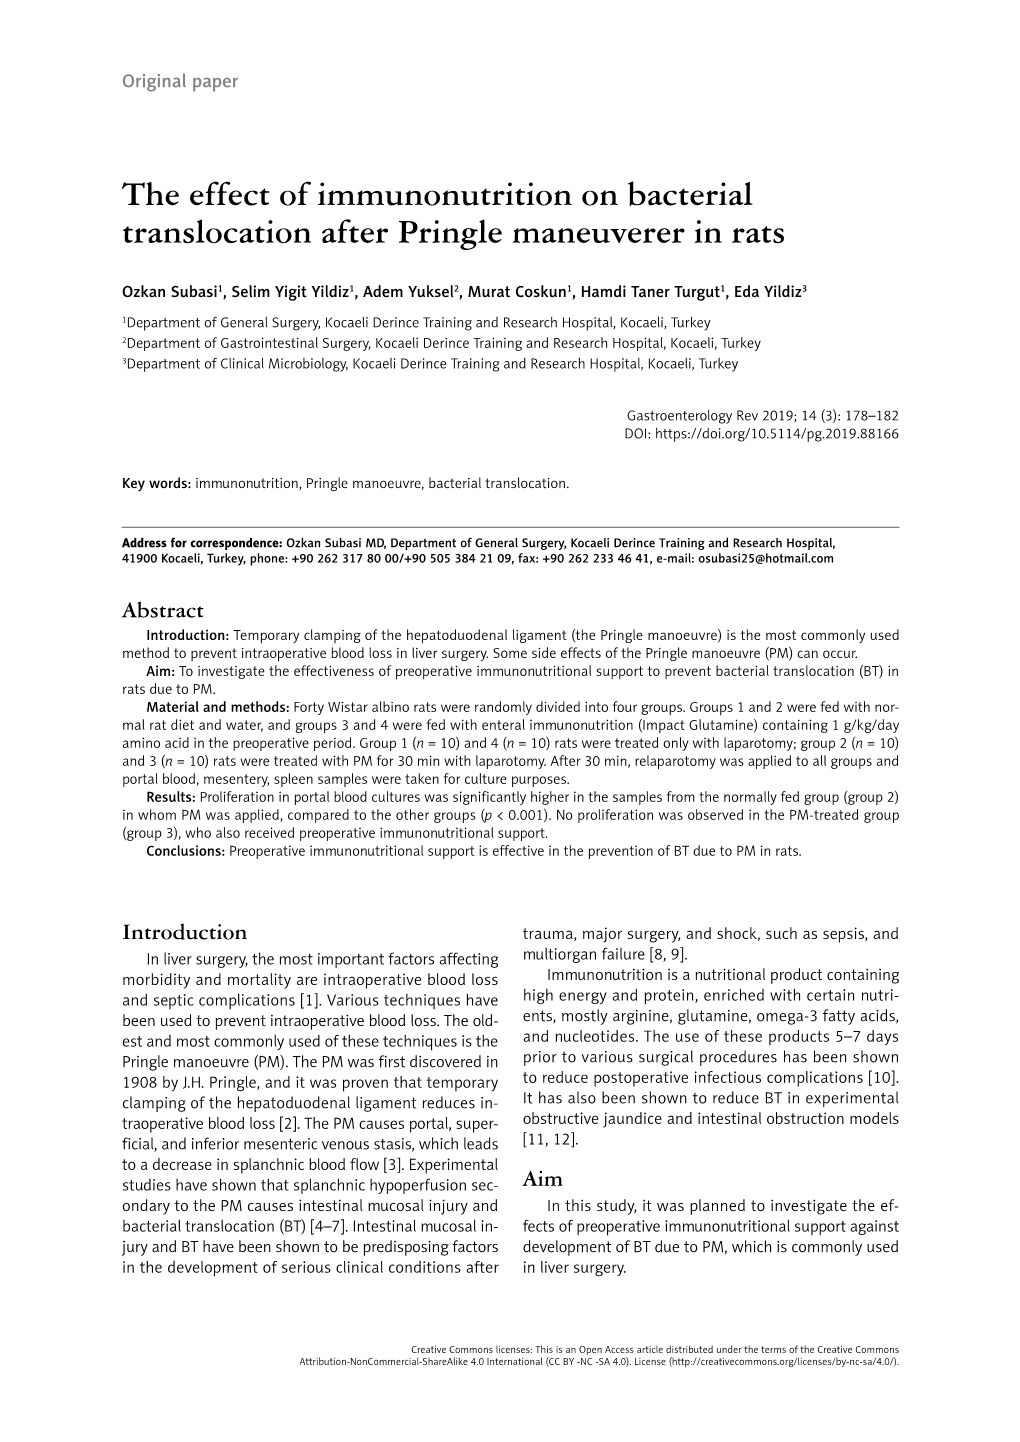 The Effect of Immunonutrition on Bacterial Translocation After Pringle Maneuverer in Rats